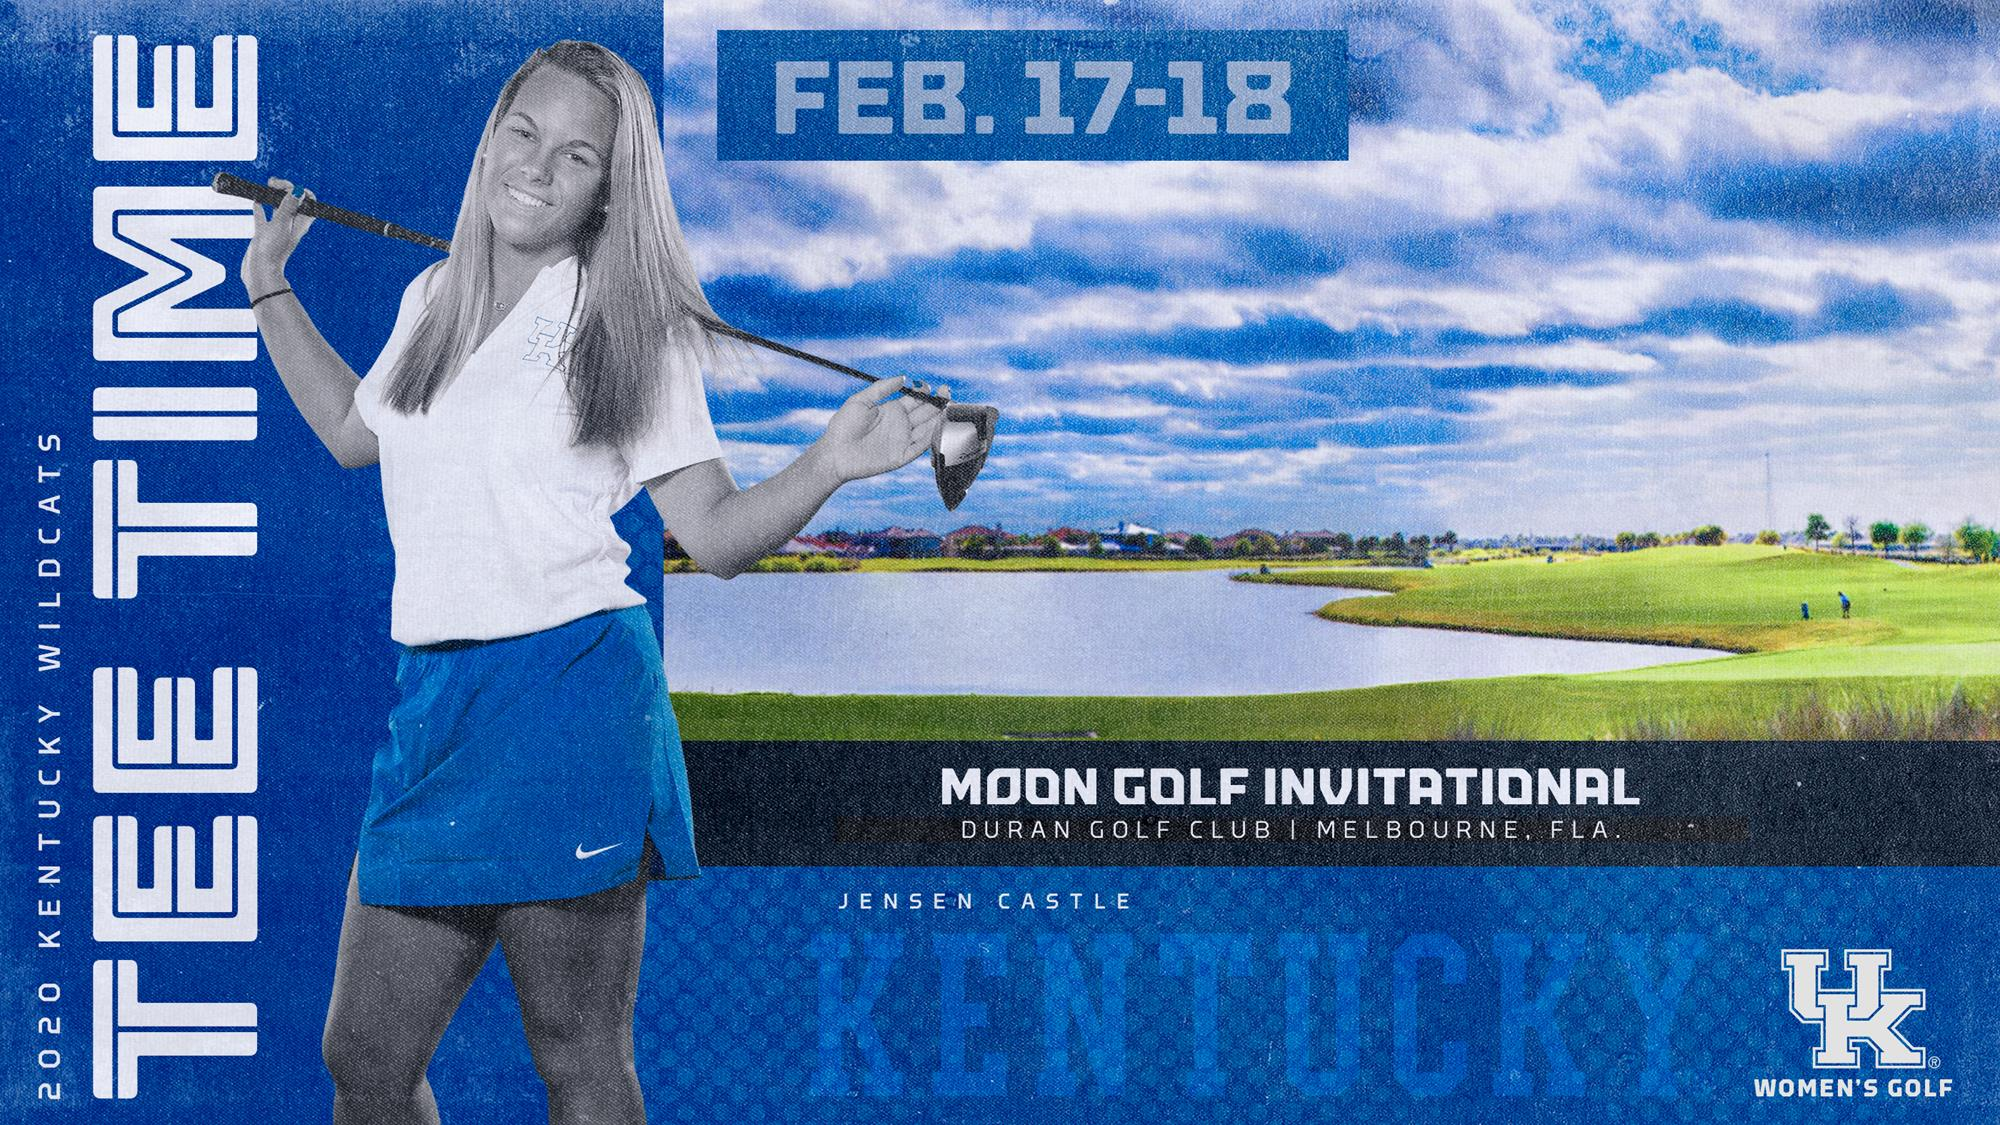 UK Women’s Golf Returns to Action at Moon Golf Invitational